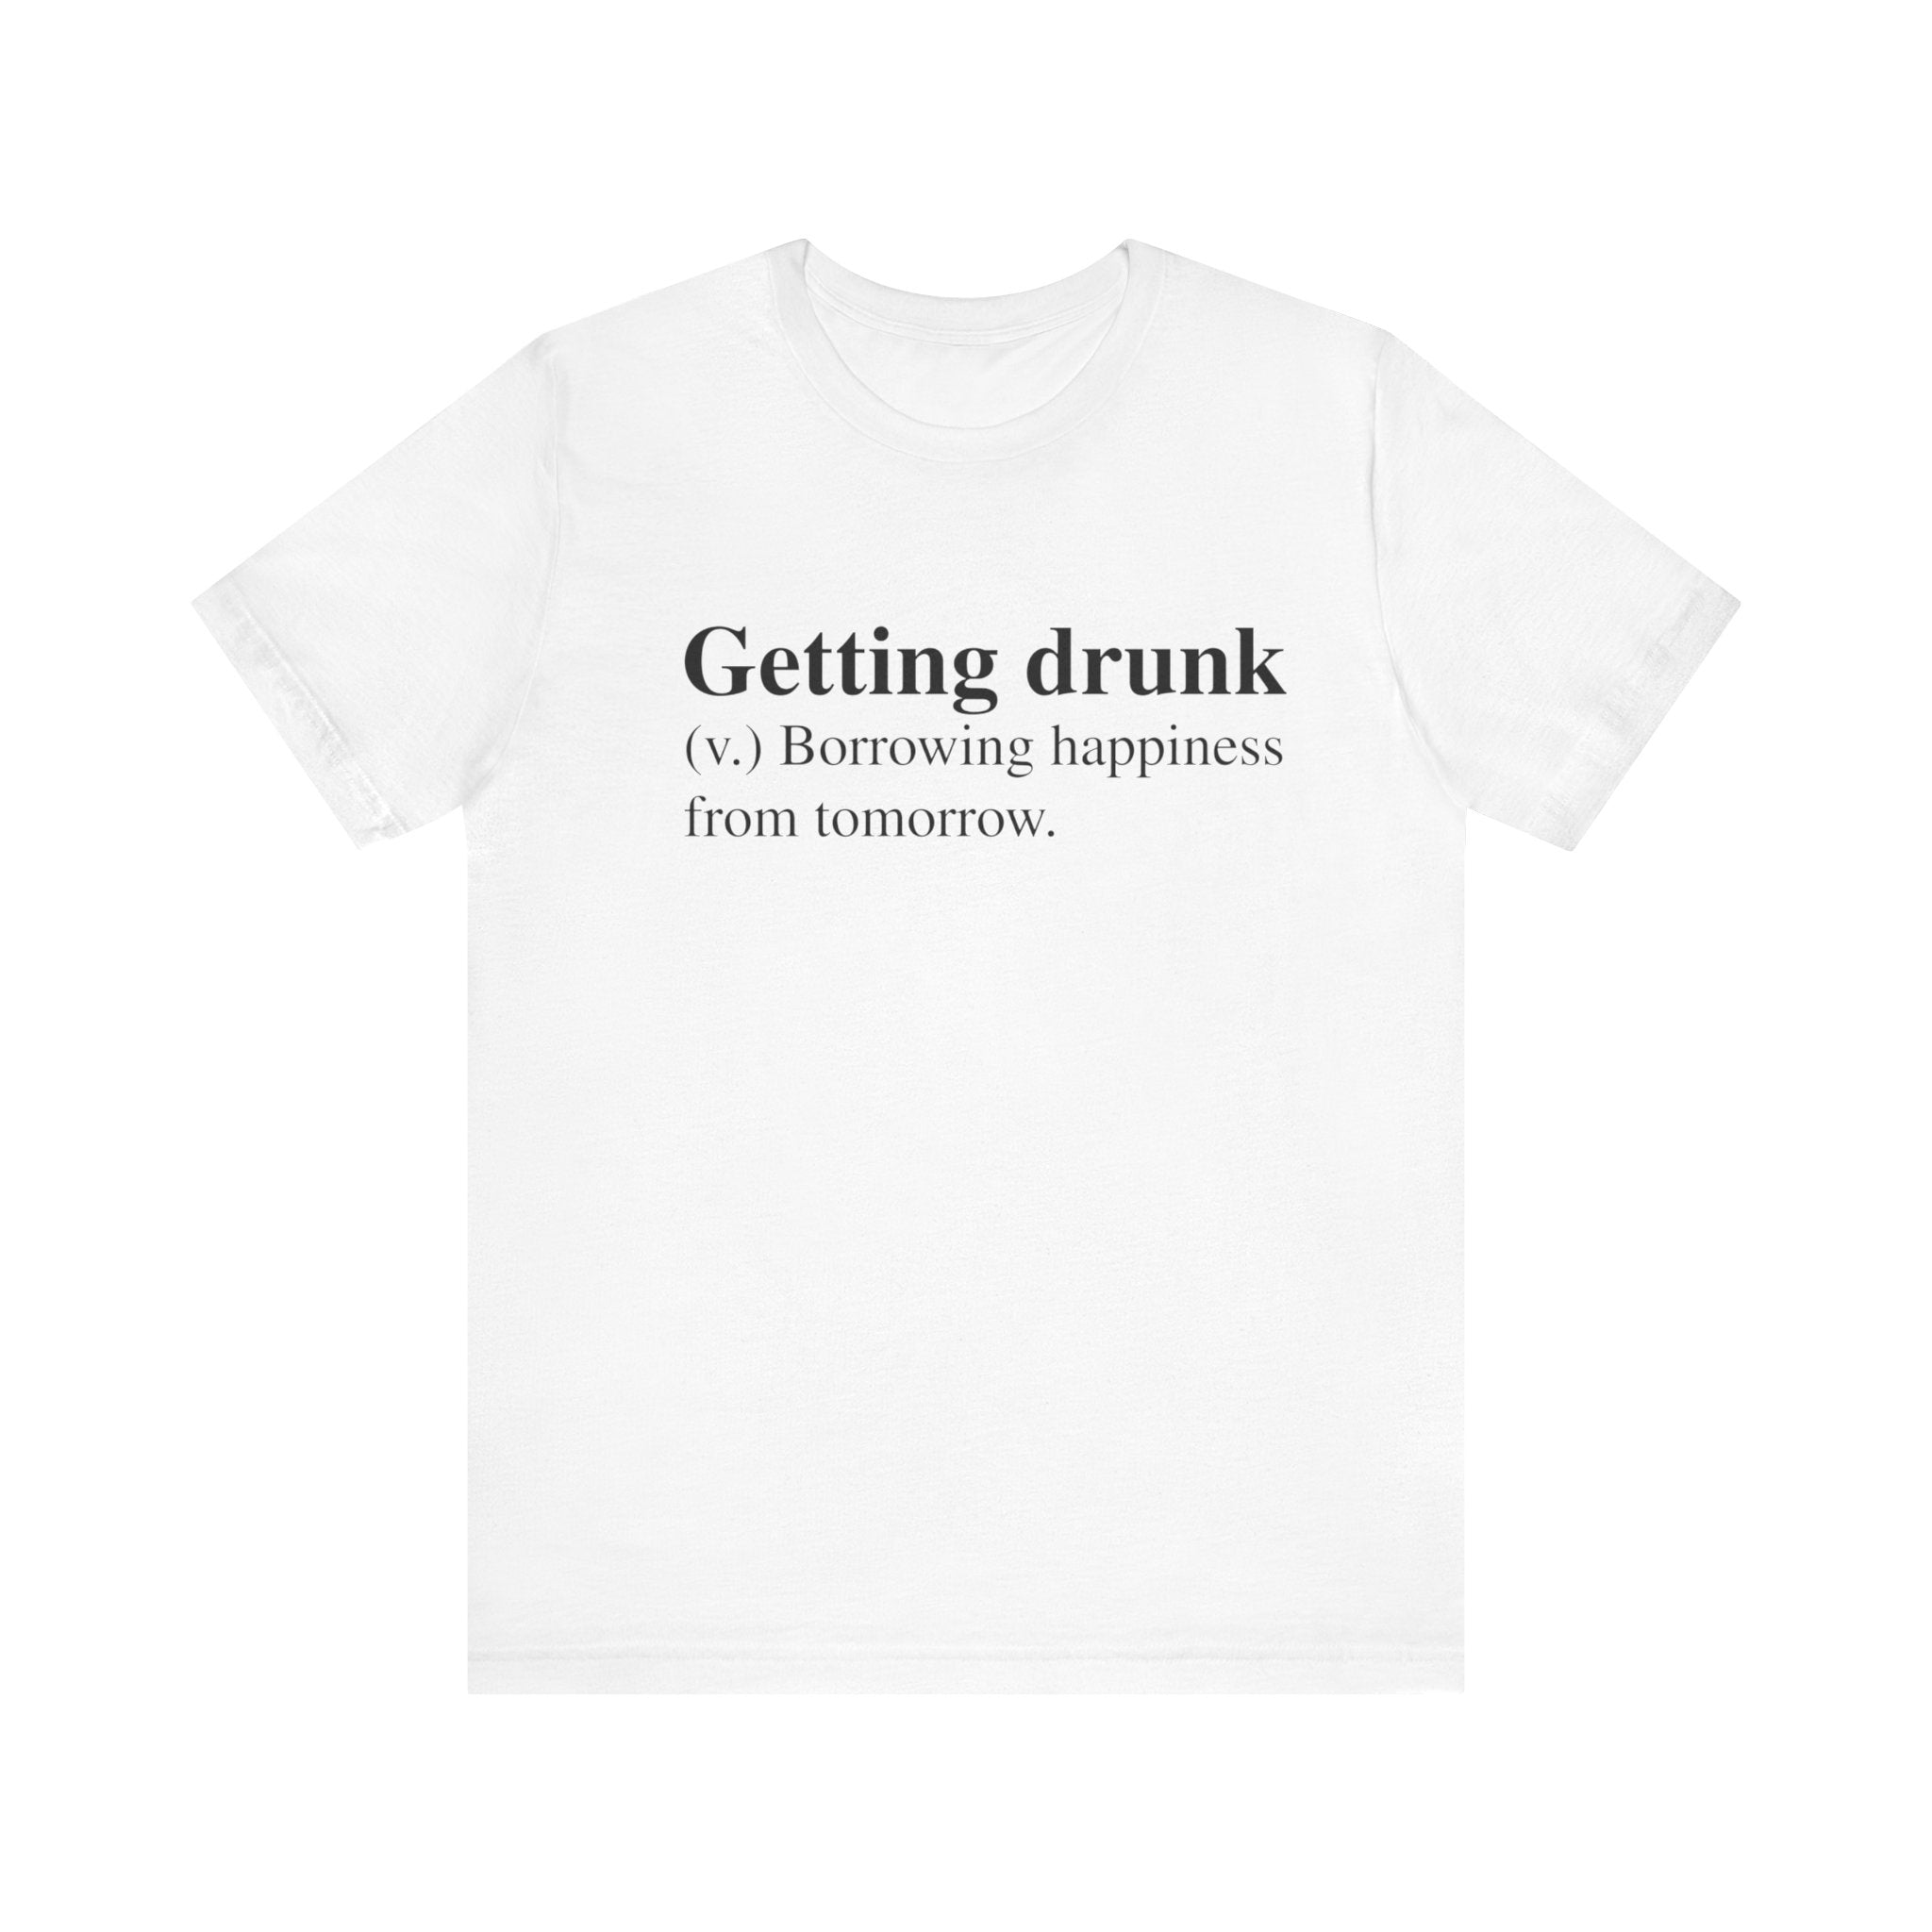 White Getting Drunk T-shirt with text "getting drunk (v.) borrowing happiness from tomorrow." printed in quality print on the front.